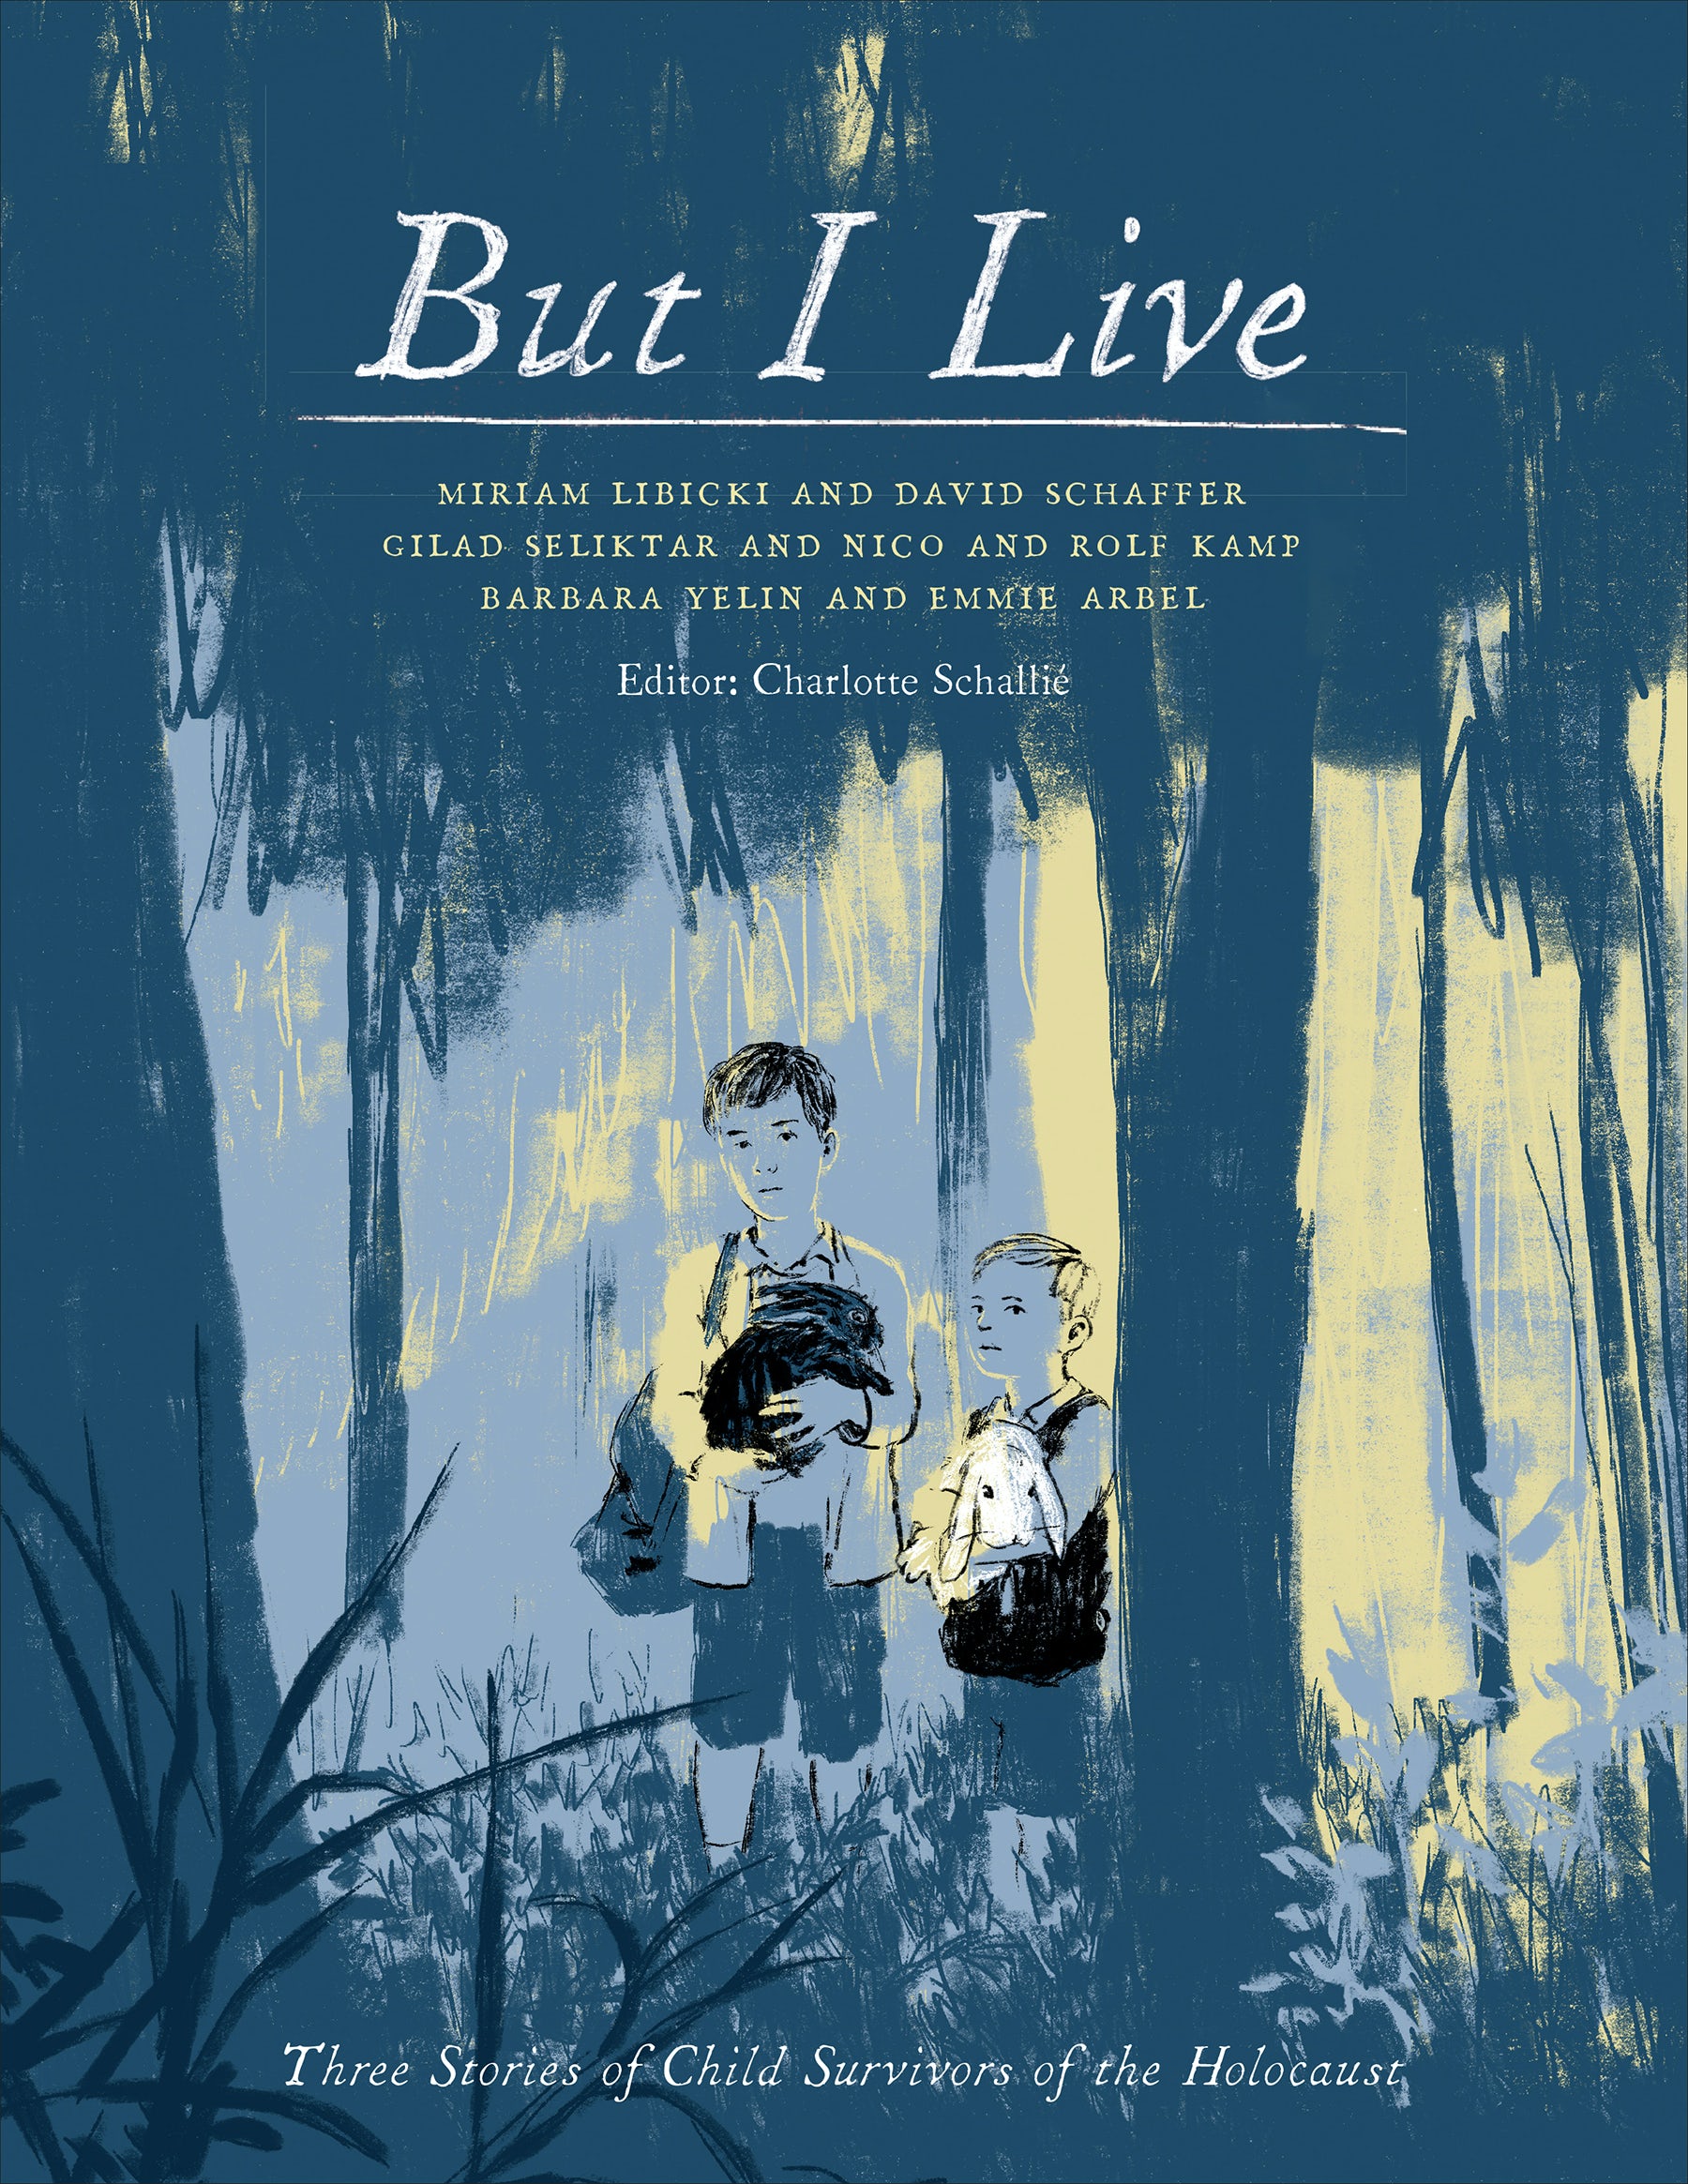 Rolf Kamp and Nico Kamp’s experiences are illustrated by graphic novelist Gilad Seliktar on the cover of the book BUT I LIVE: Three Stories of Child Survivors of the Holocaust, published by University of Toronto Press, in this page showing two boys, standing in the woods, each carrying a rabbit in their arms.